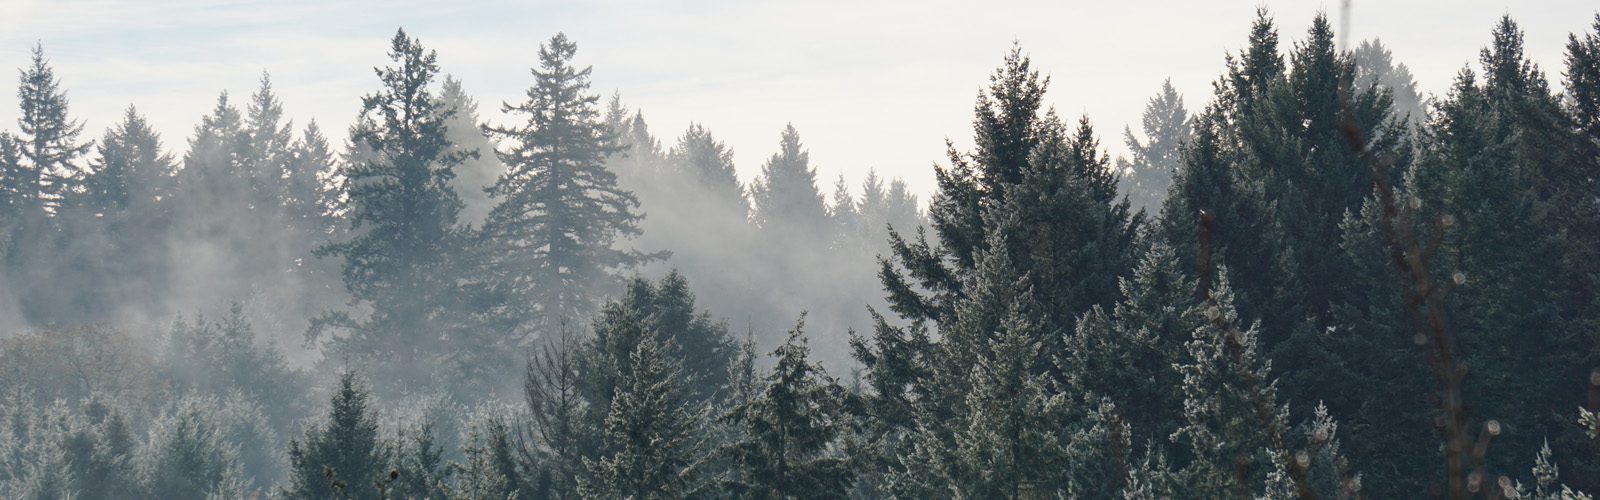 pine trees in a misty forest